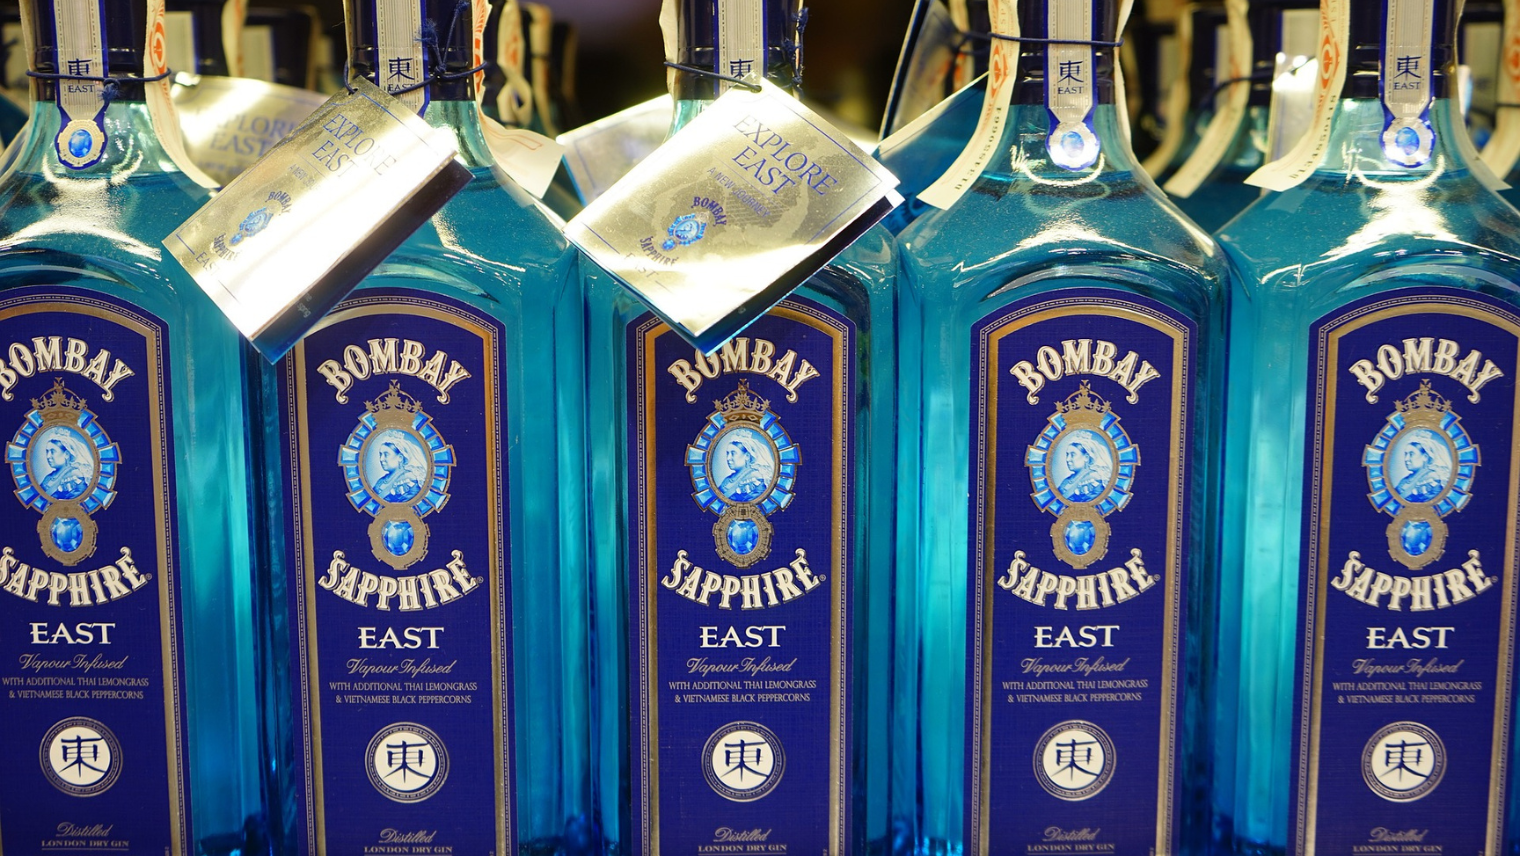 Image of Bombay Sapphire gin bottles lined up